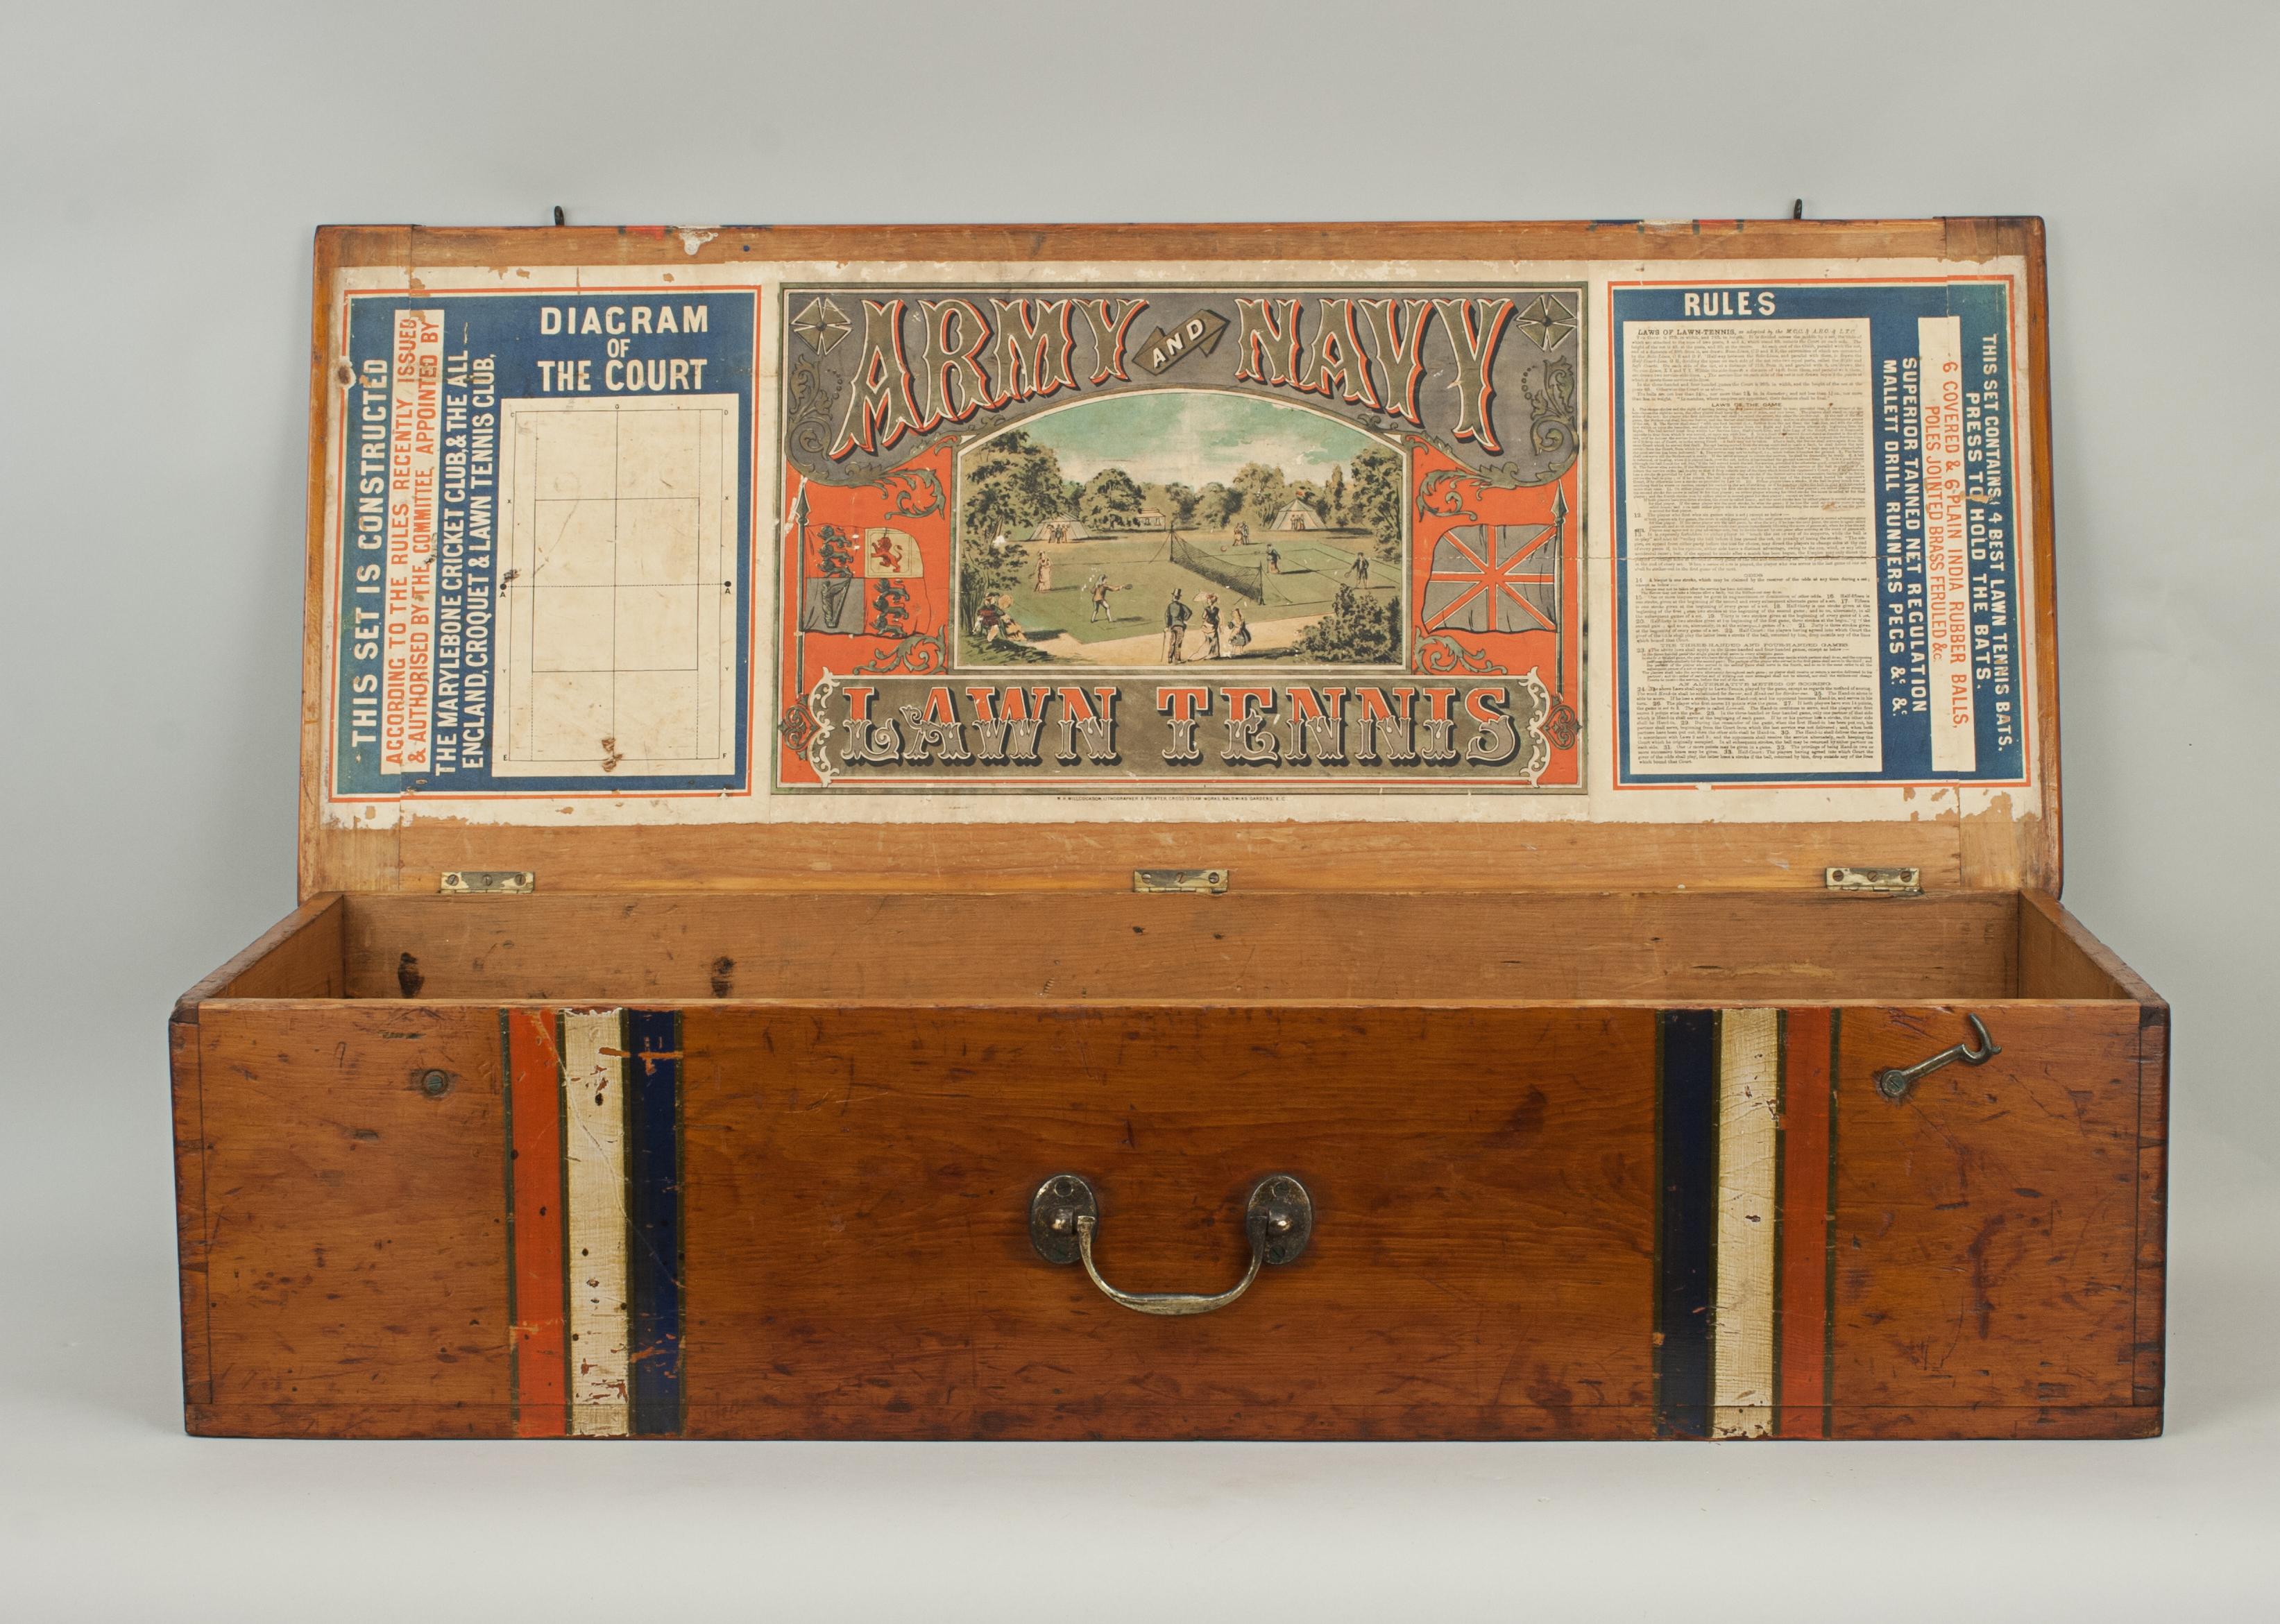 Sporting Art Antique Lawn Tennis Box with Poster, Army and Navy, 1870, s